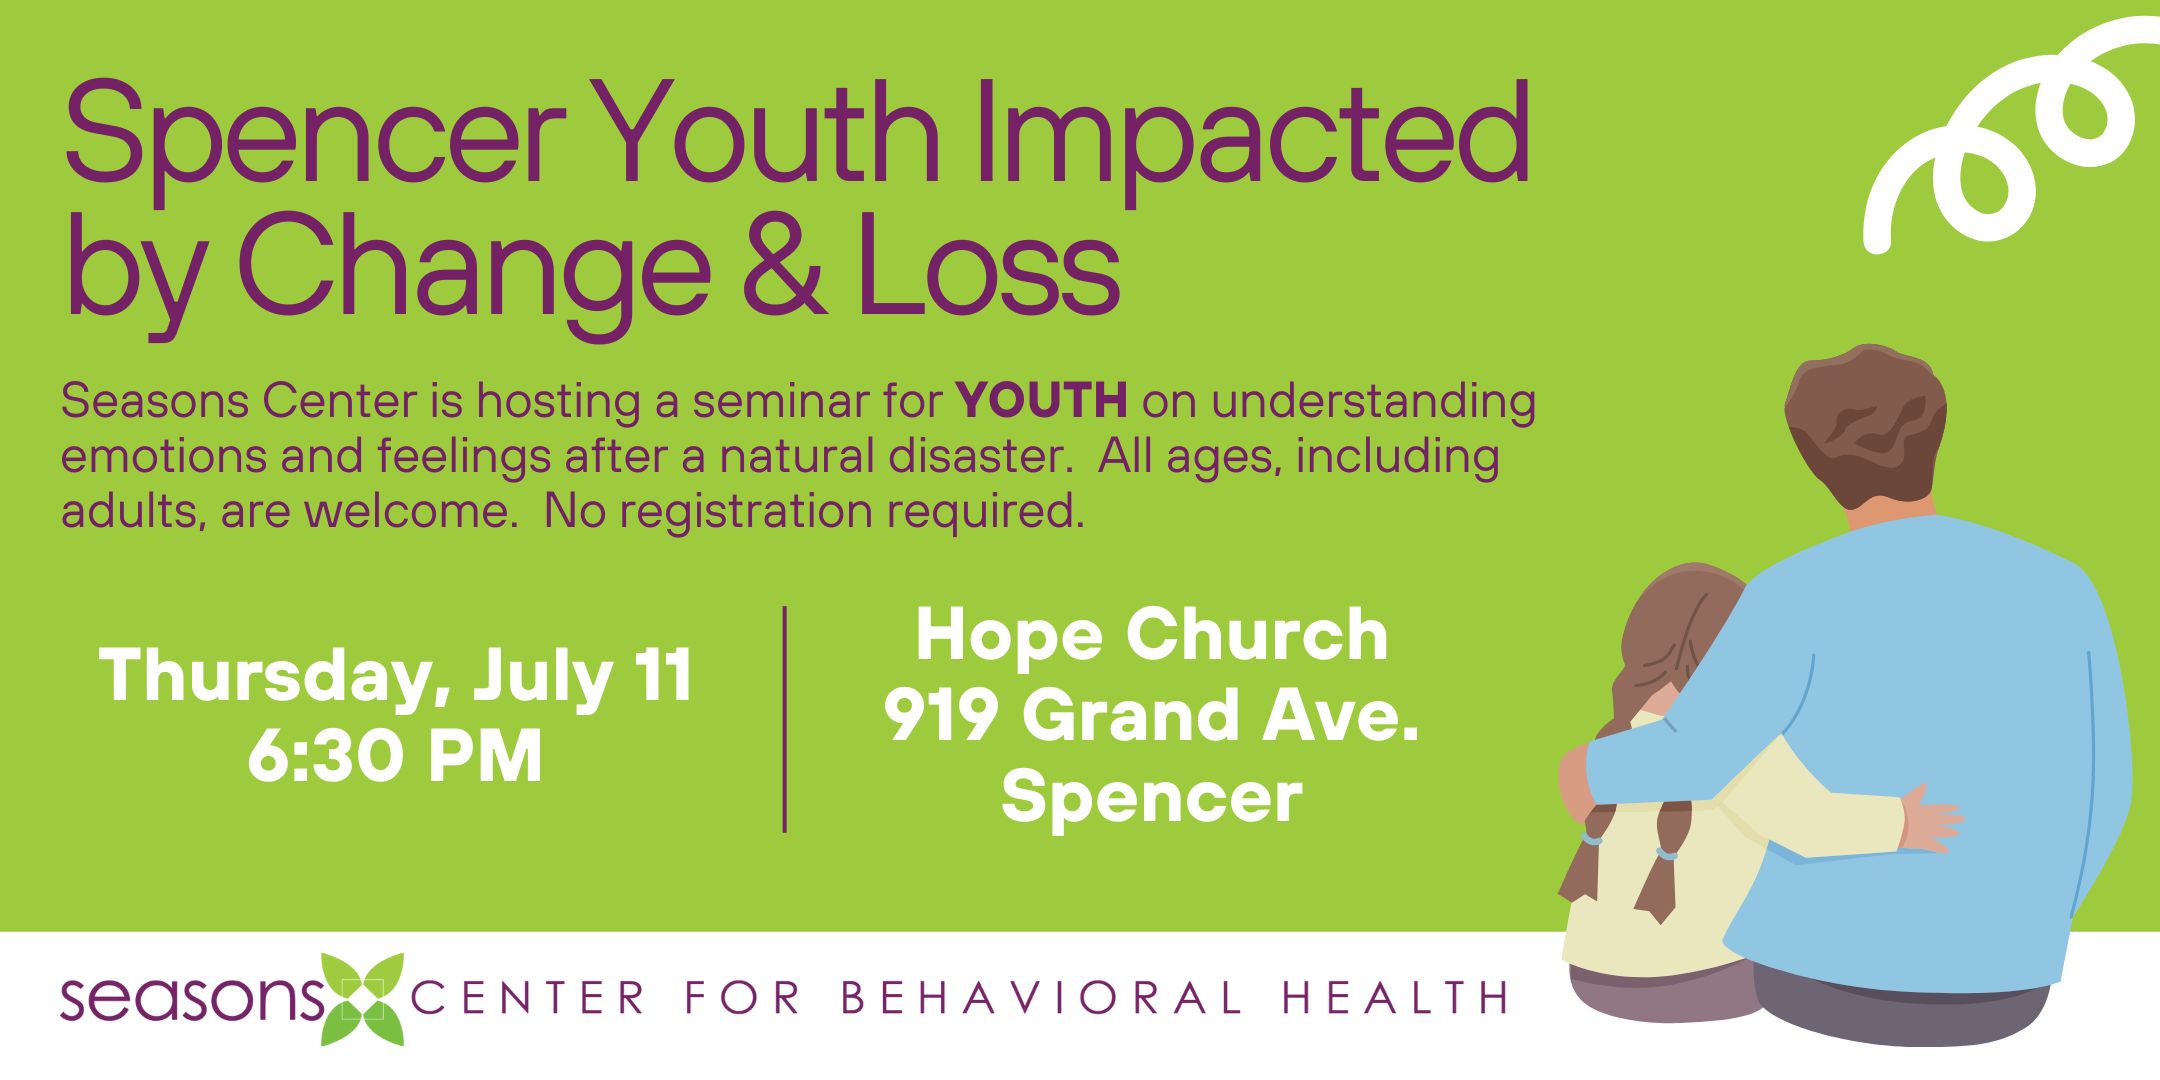 Seasons Center Hosts: Spencer Youth Impacted by Change & Loss